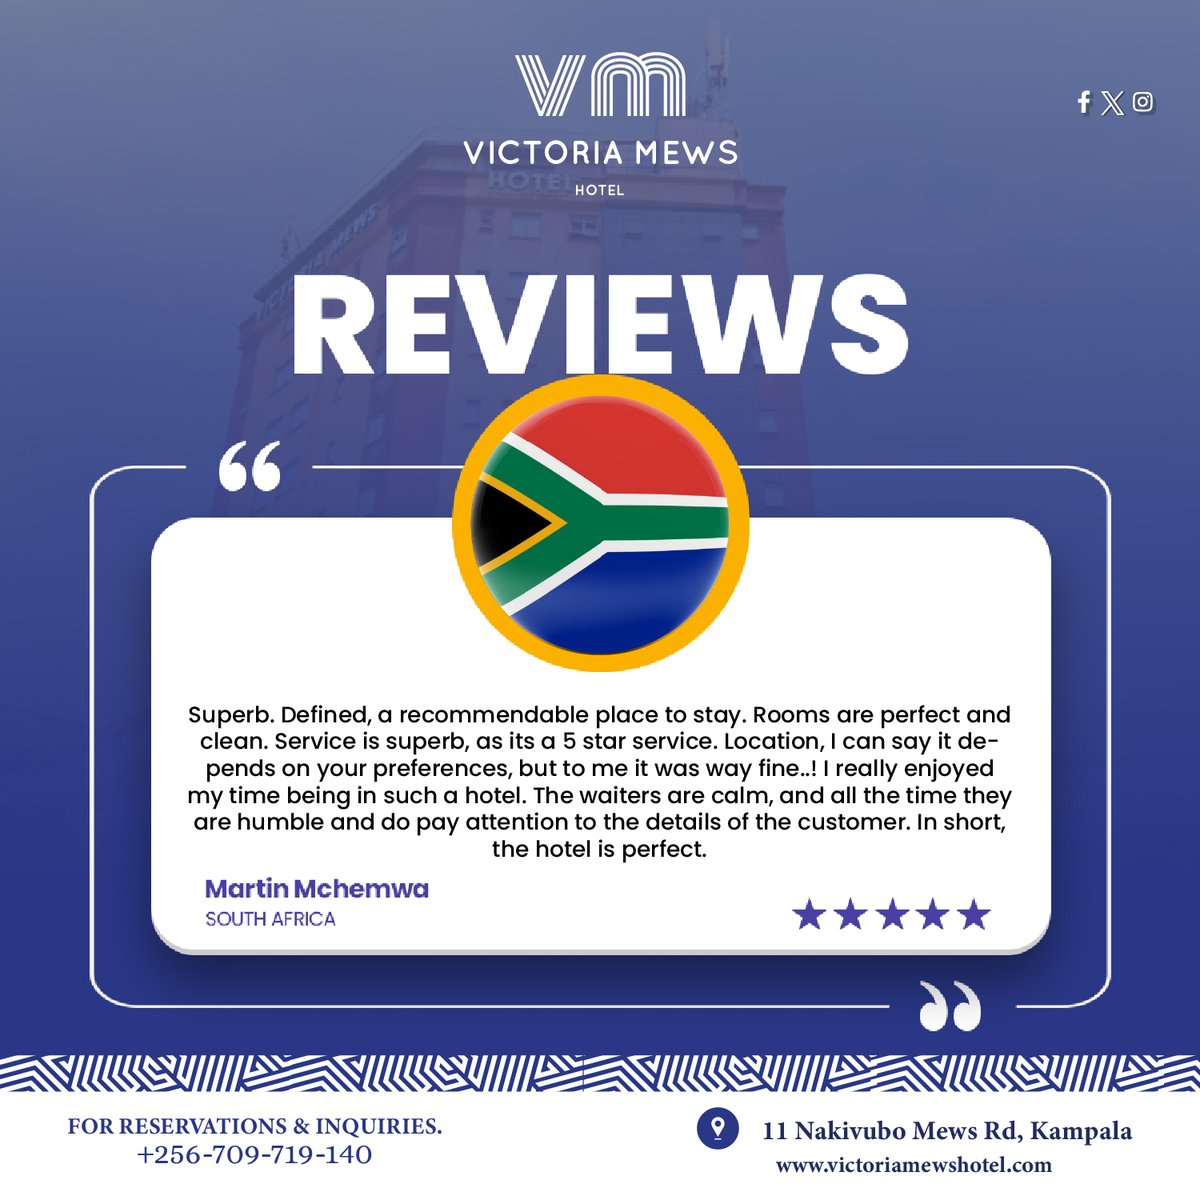 From immaculate rooms to attentive service, our hotel ensures an unforgettable stay. Thank you for your kind words! ✨🏨 

#PerfectionDefined #VictoriaMewsHotel